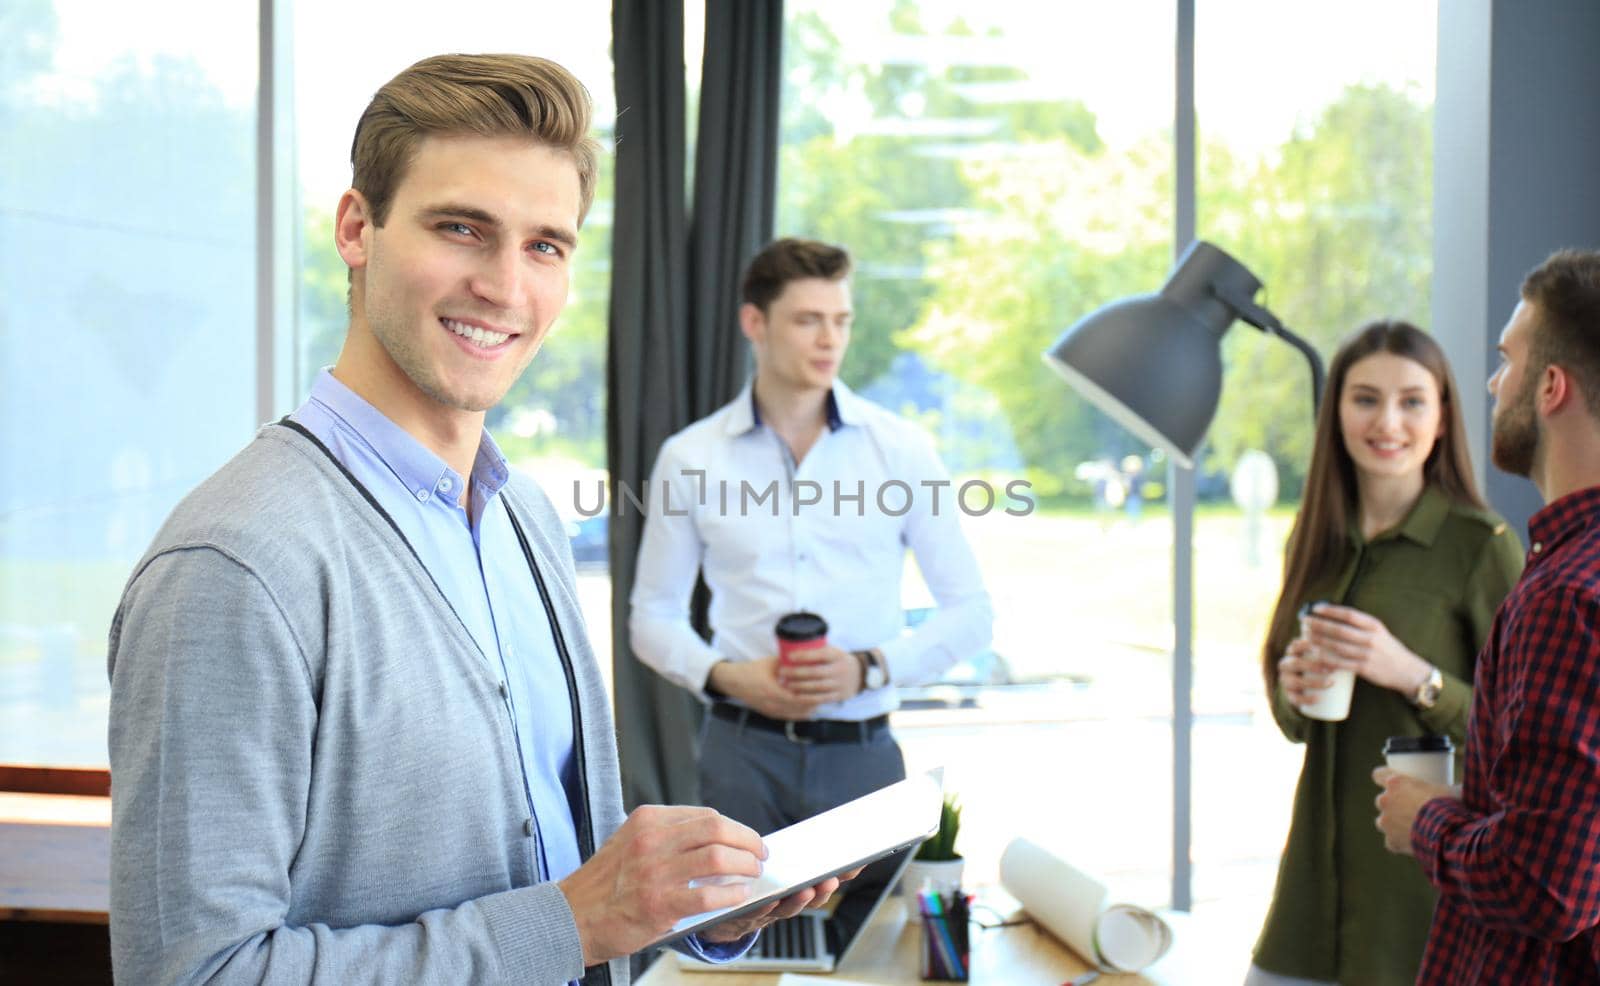 Smiling young man using digital tablet in the office.